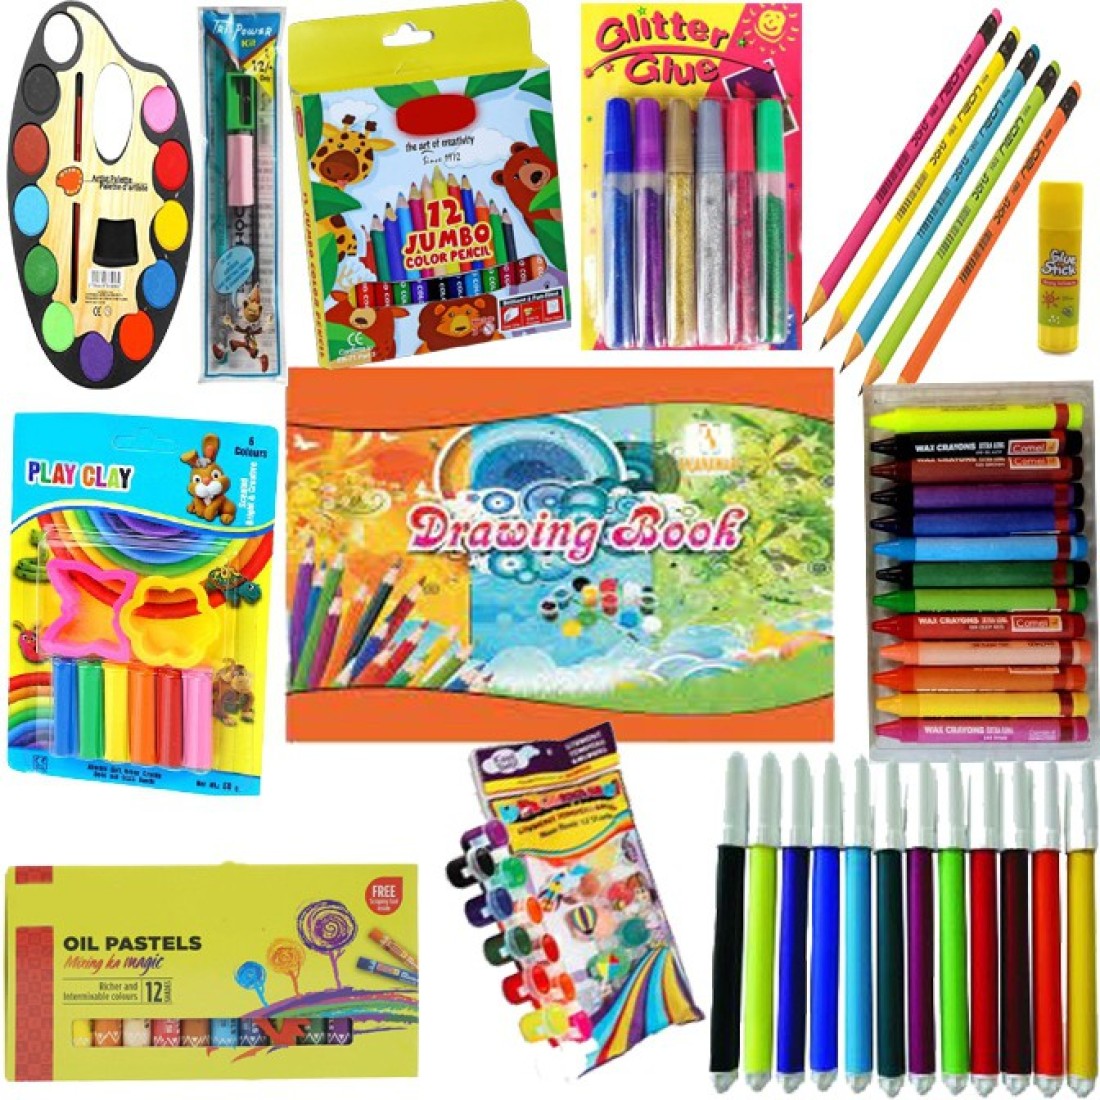 Colouring Series-Art Set, Painting Kit, Stationary kit, modelling clay  set, crayons set for kids, colours set for drawing, water colors  painting set